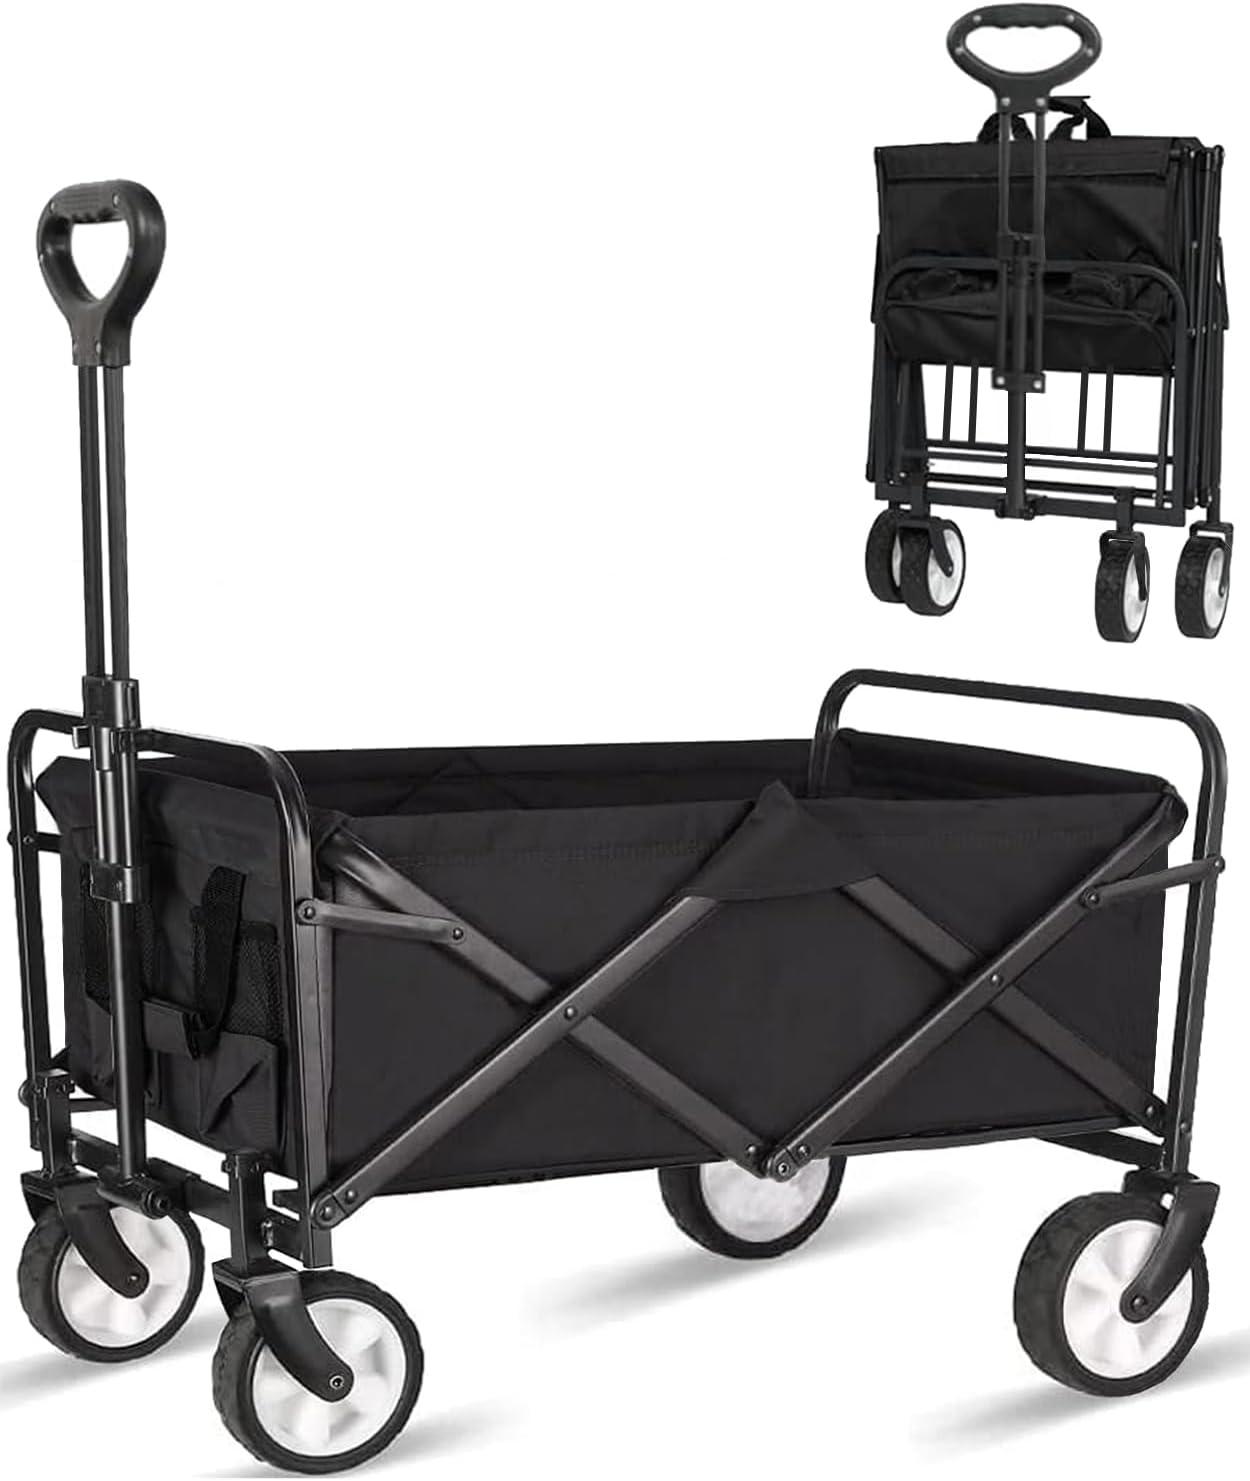 Collapsible Foldable Wagon, Beach Cart Large Capacity, (Black), Retail $60.00